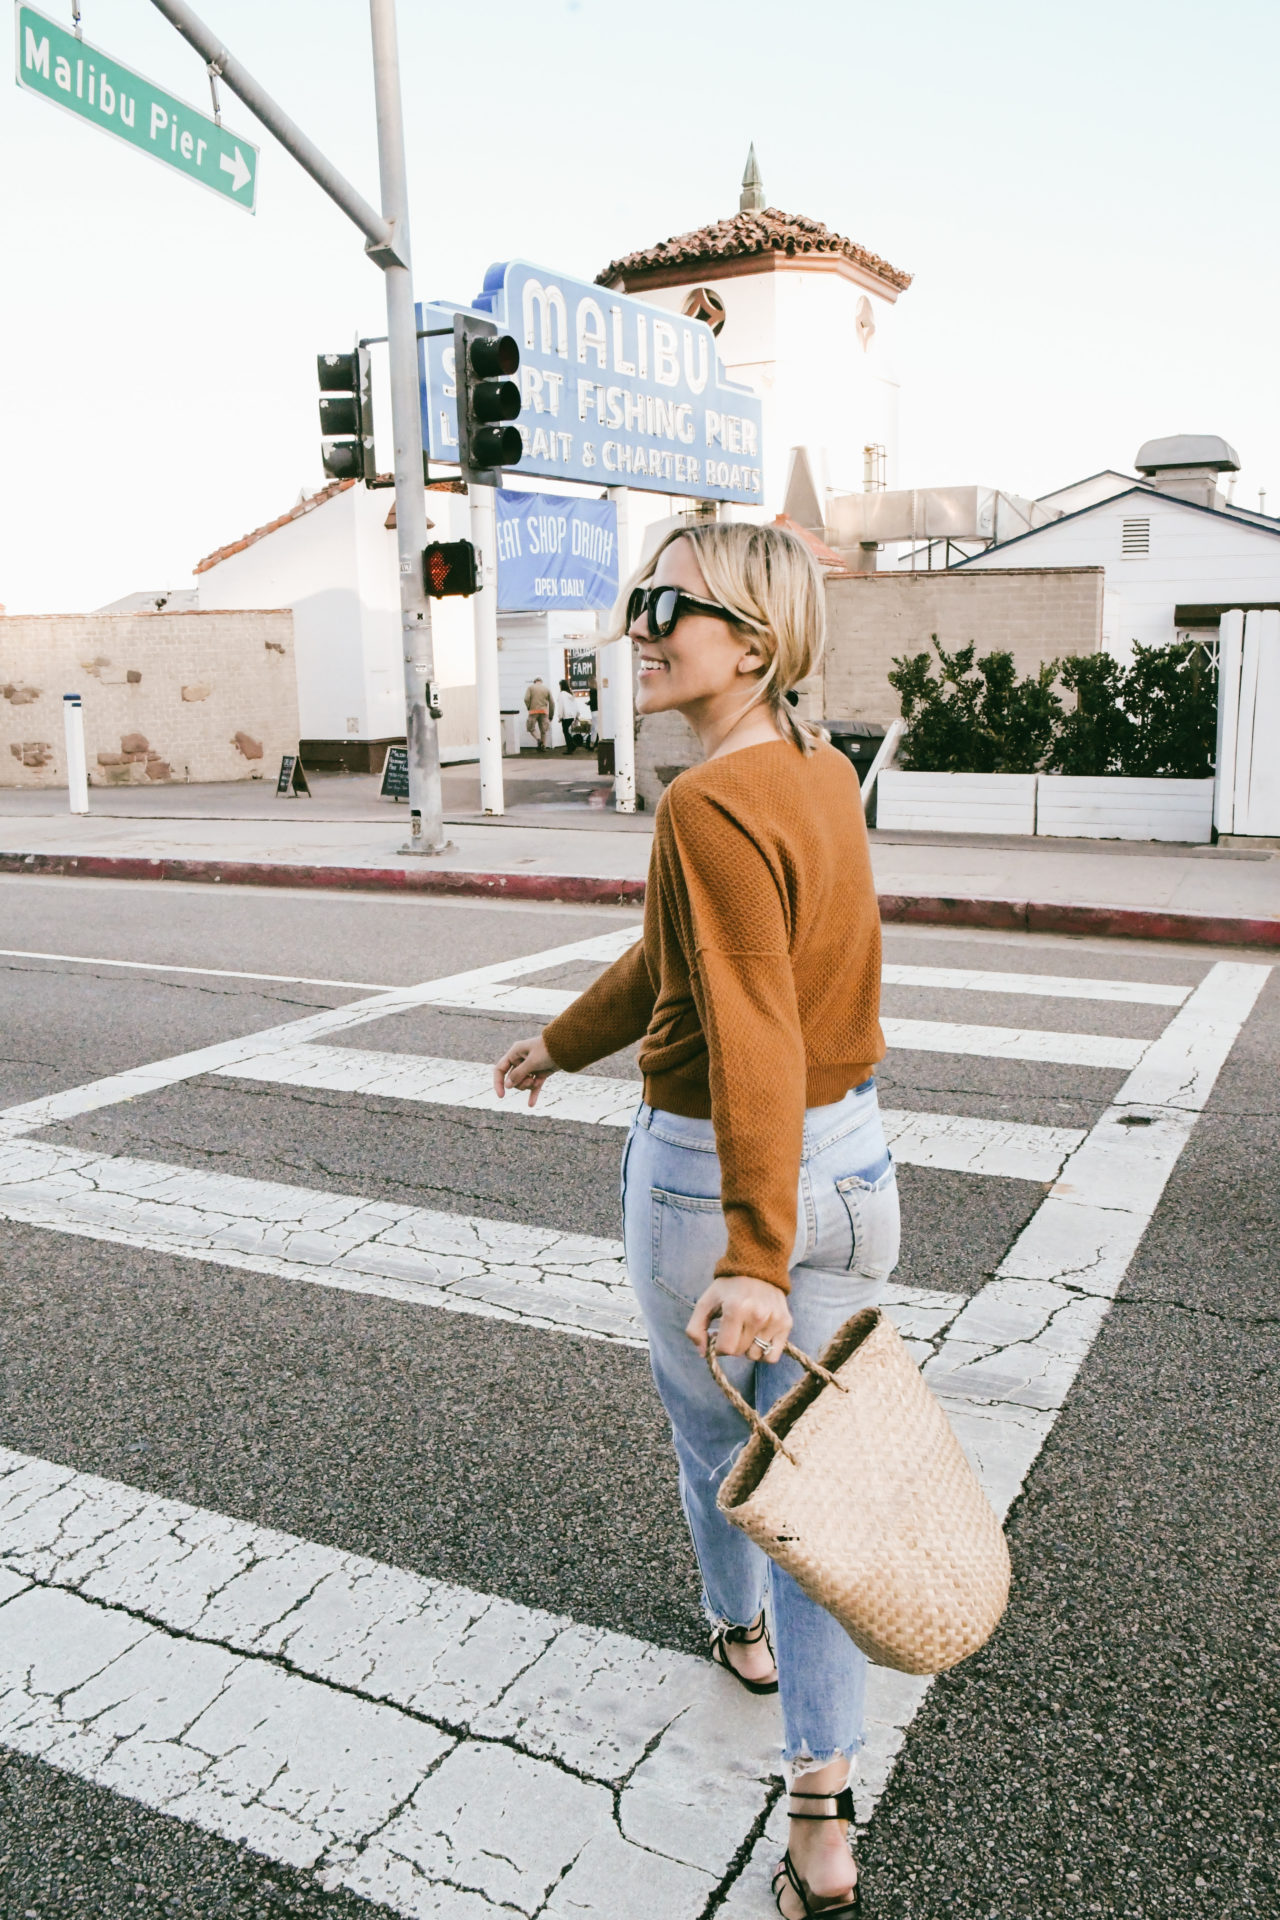 Where to Eat, Stay & Spend Time in Malibu - Damsel In Dior